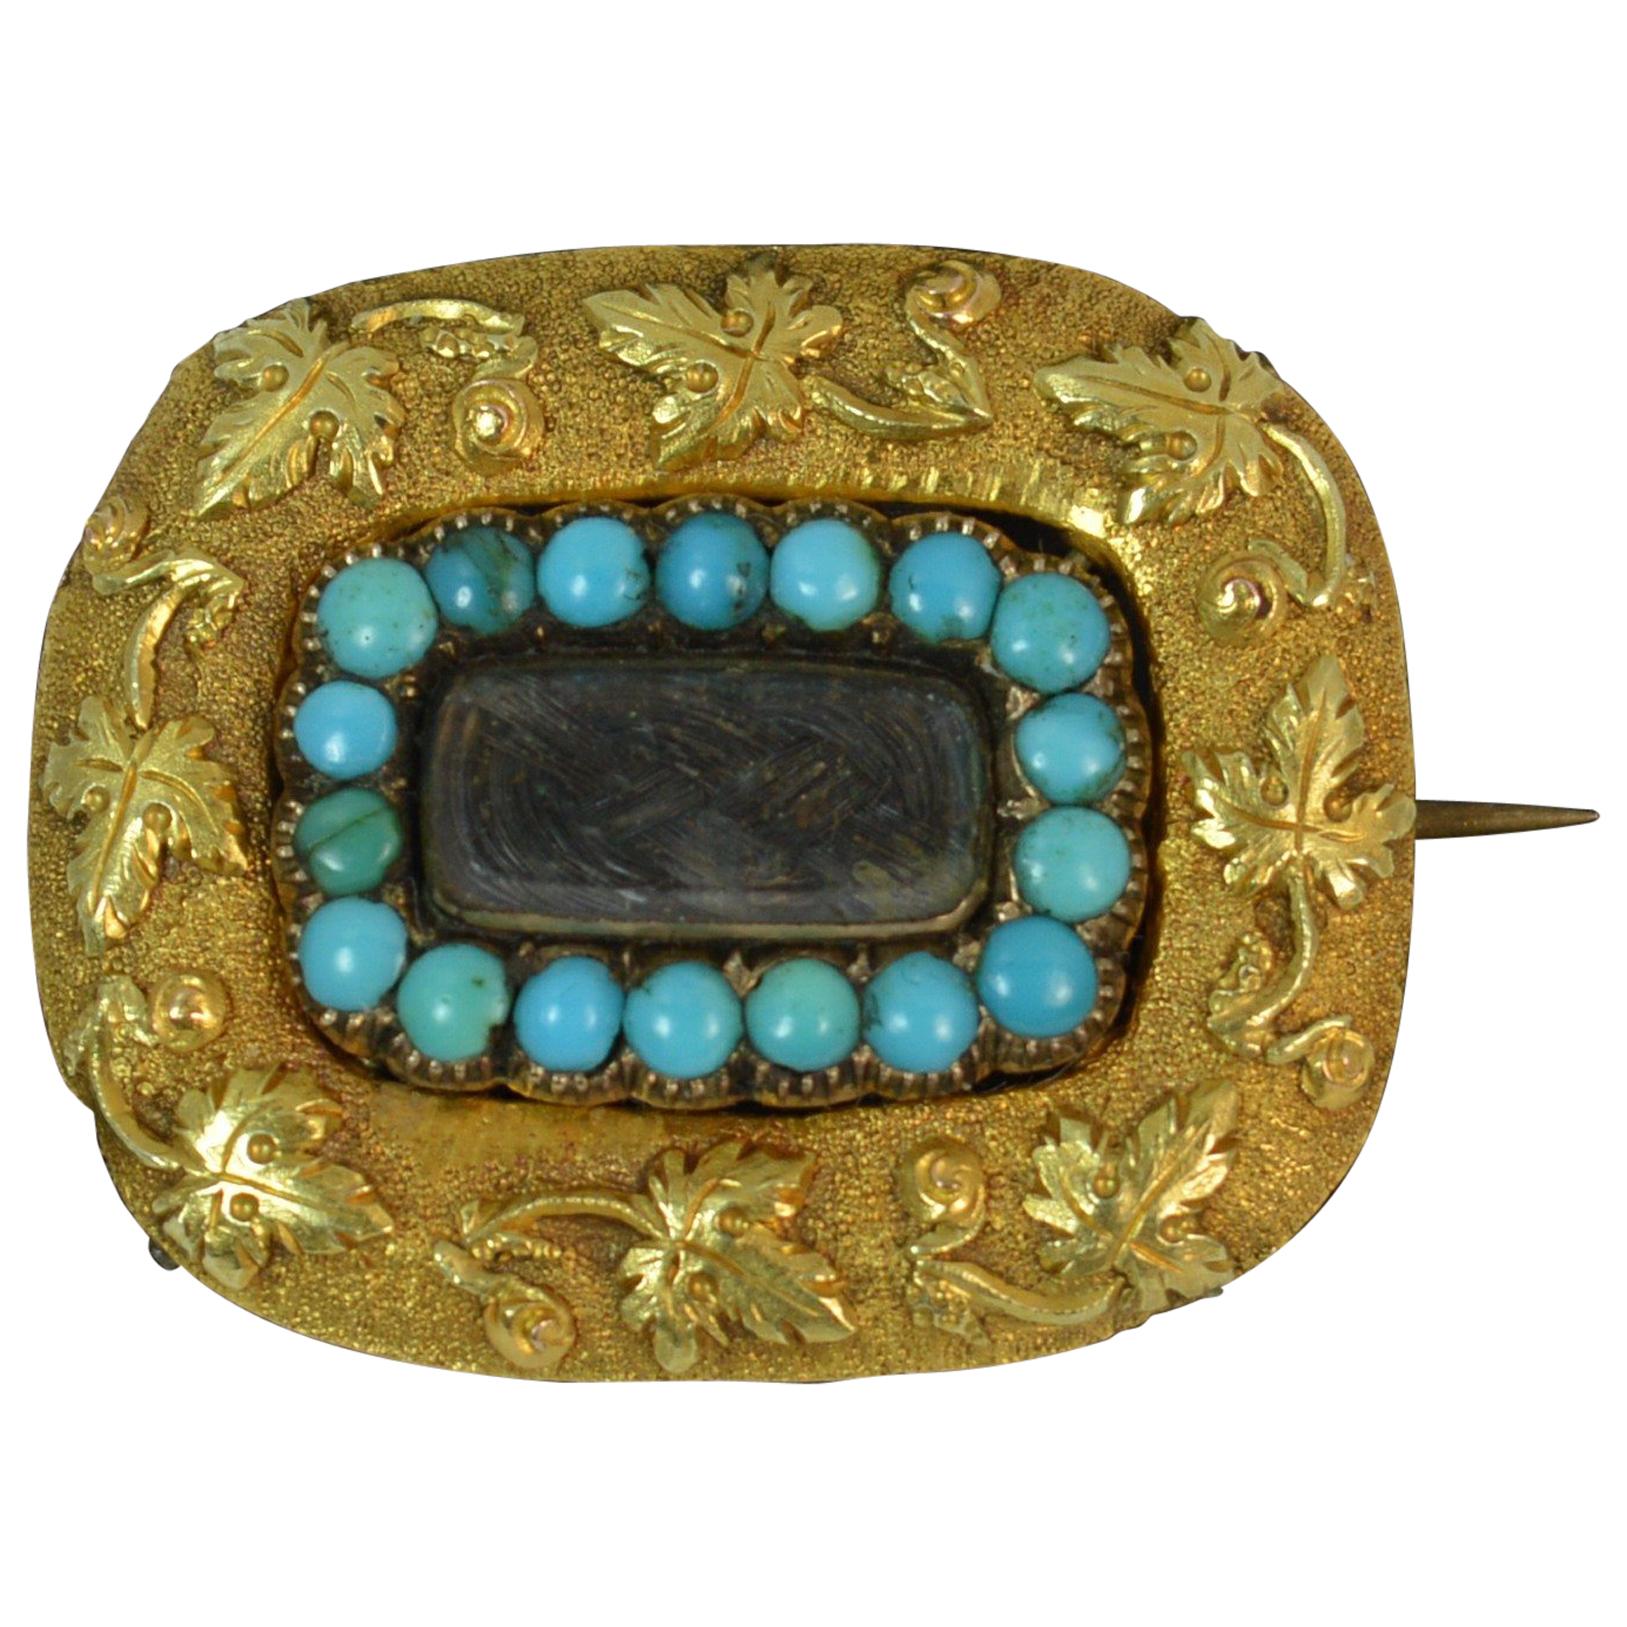 Georgian Era 18 Carat Gold Turquoise and Hair Mourning Brooch